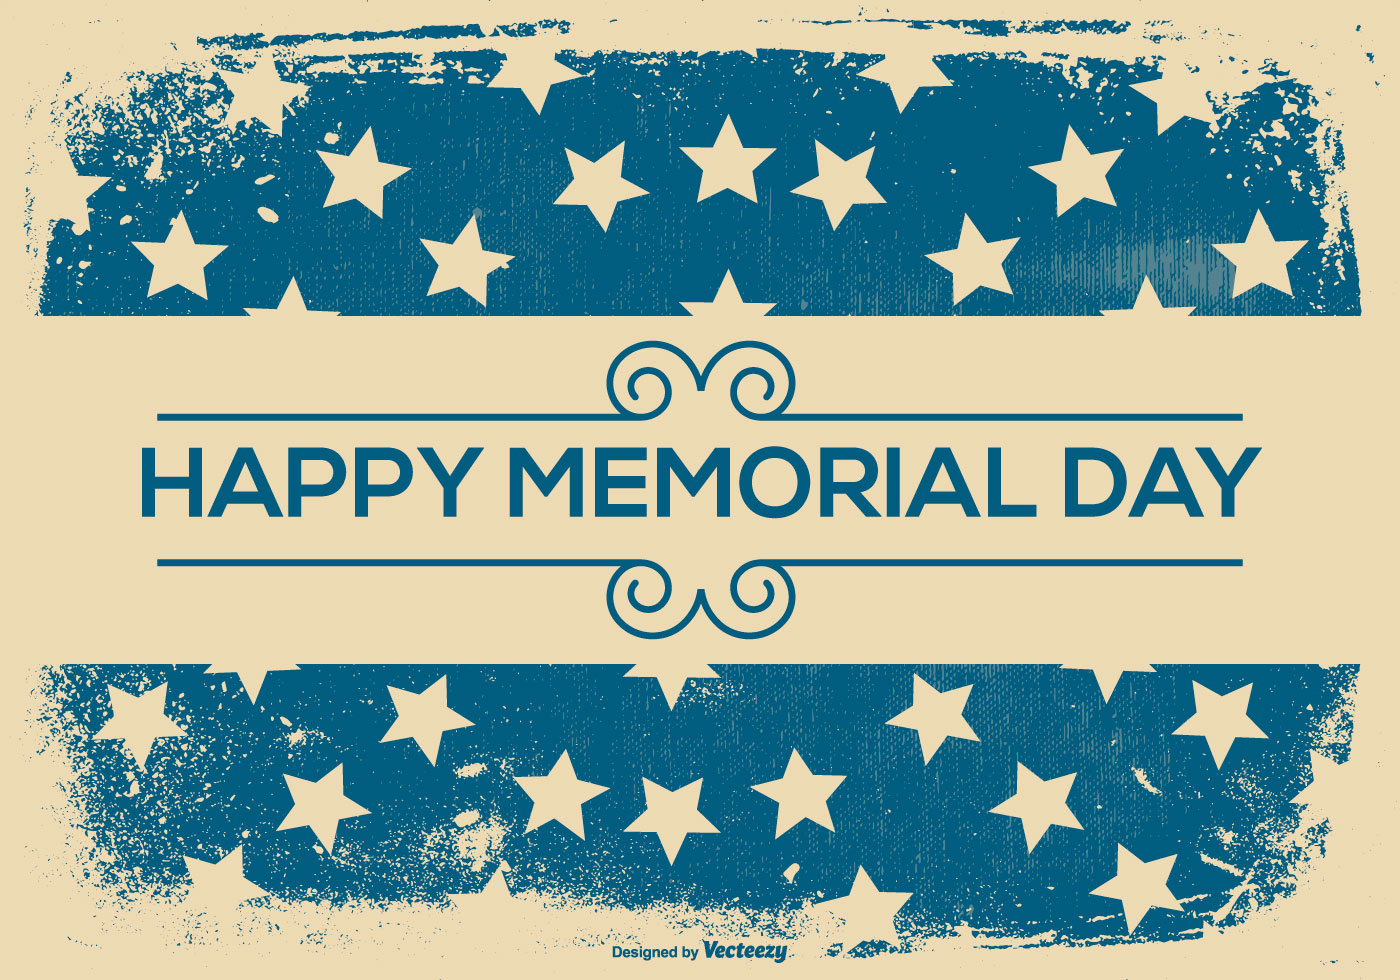 Download the Grunge Retro Memorial Day Background 148542